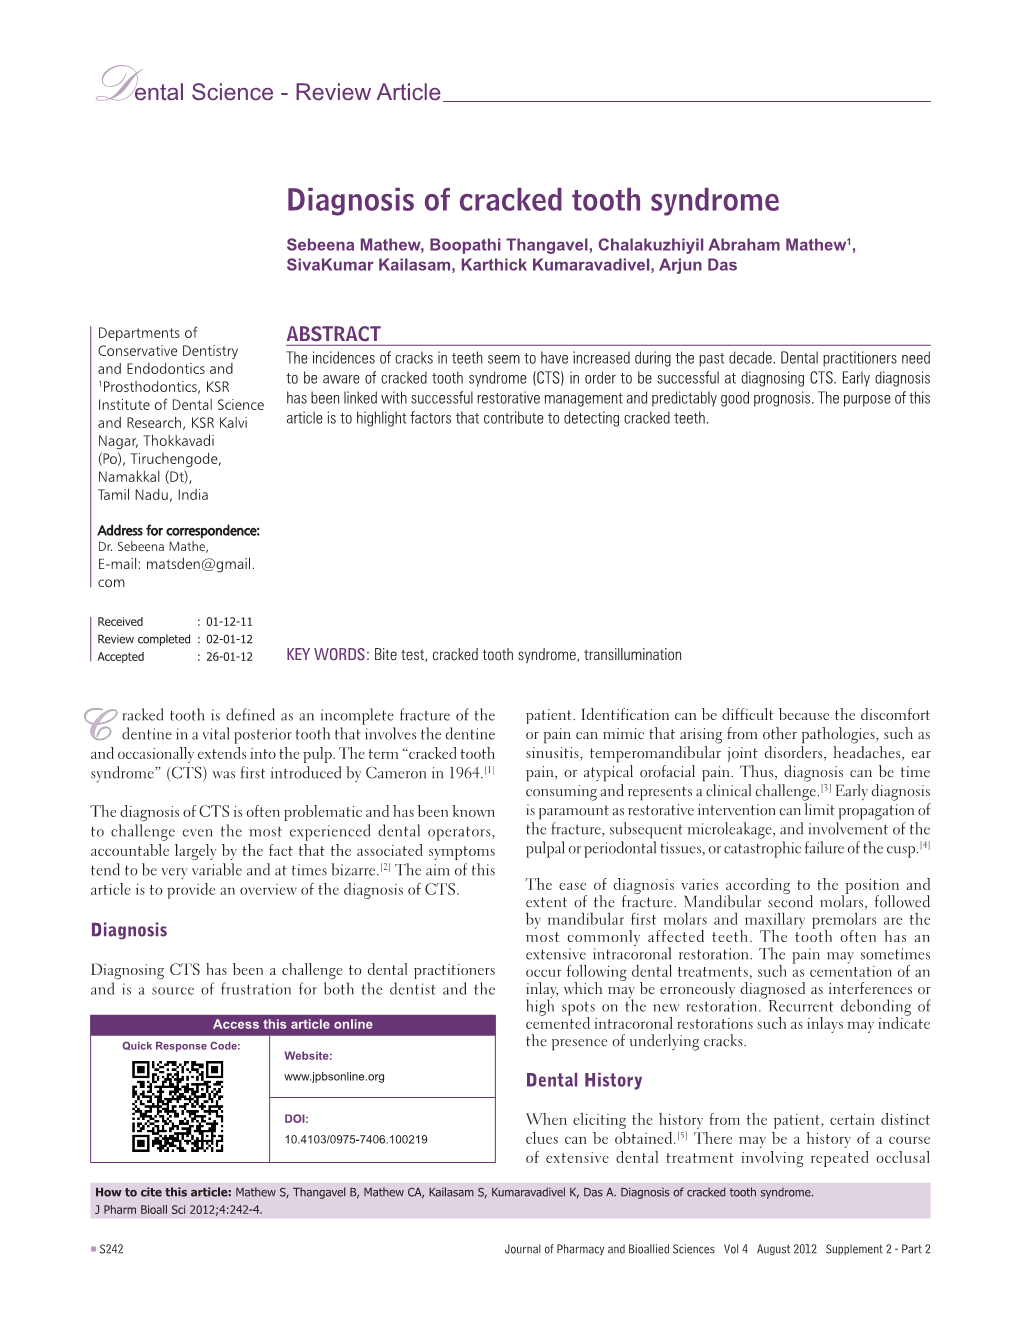 Diagnosis of Cracked Tooth Syndrome